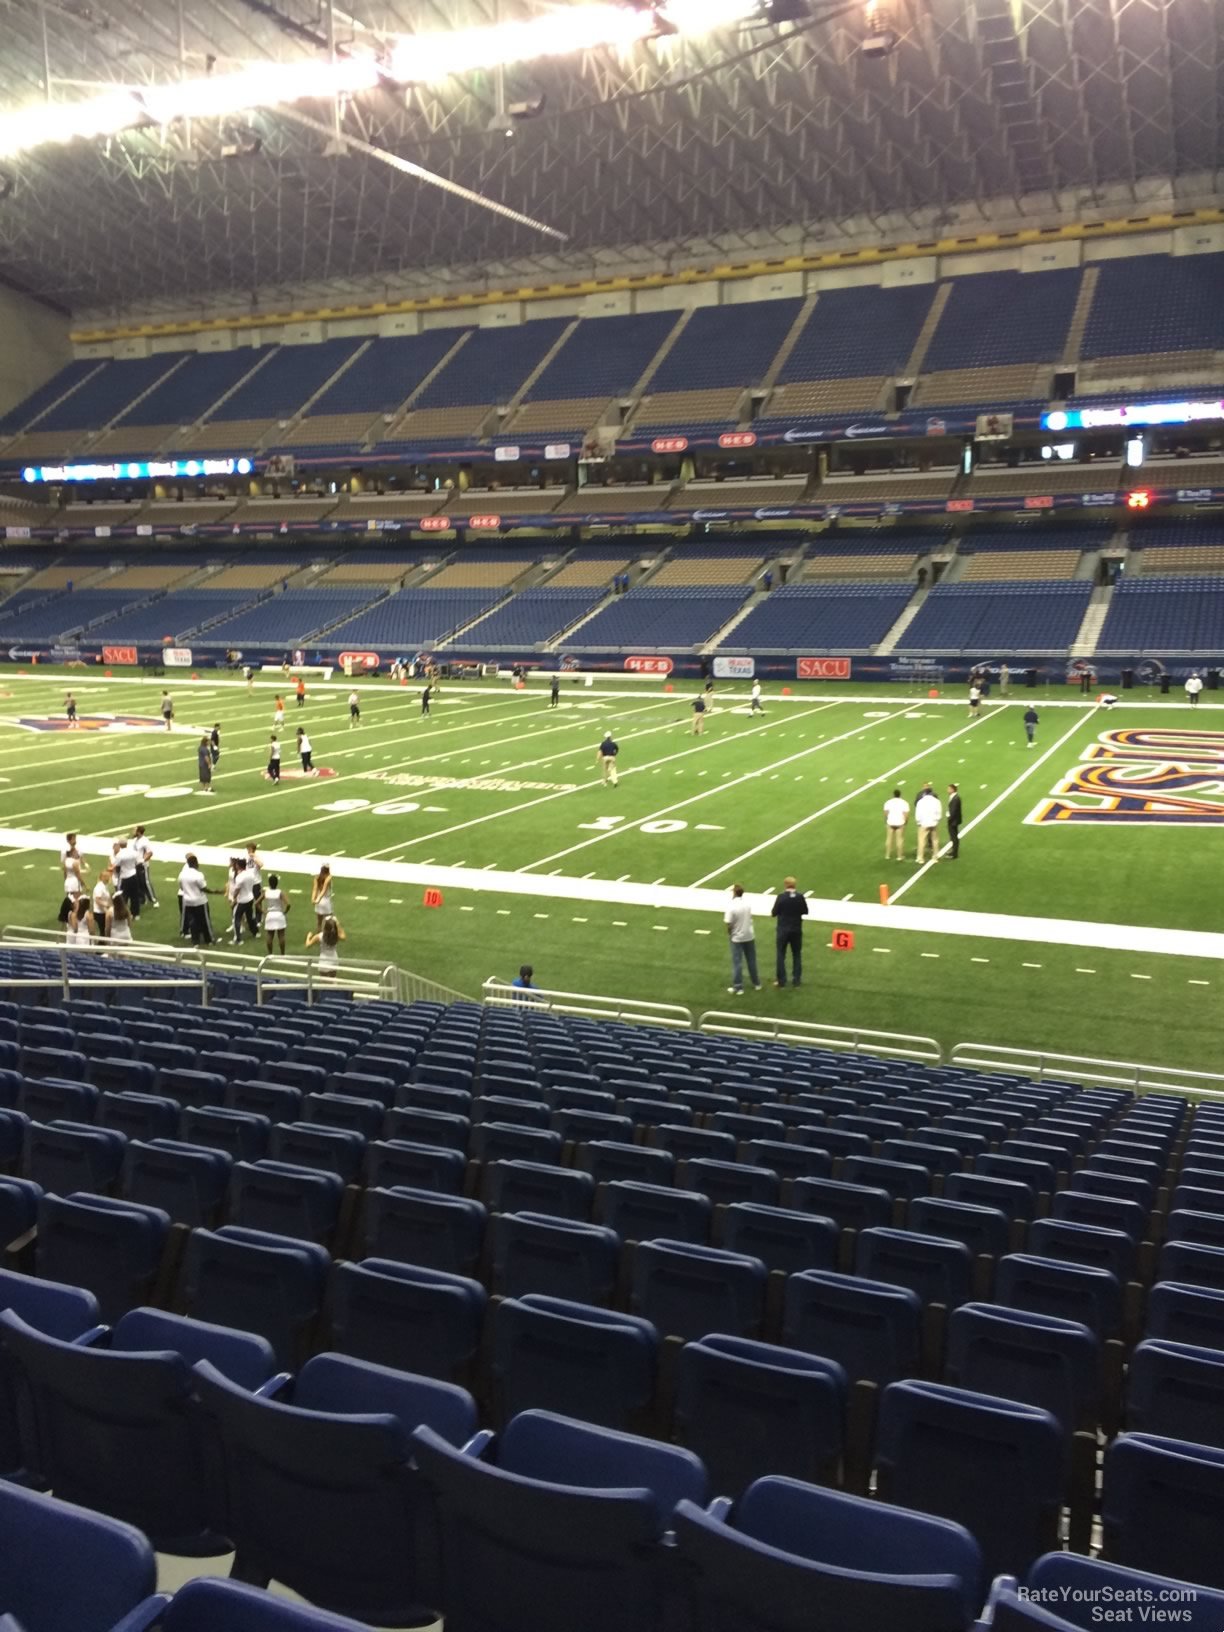 section 108, row 18 seat view  for football - alamodome